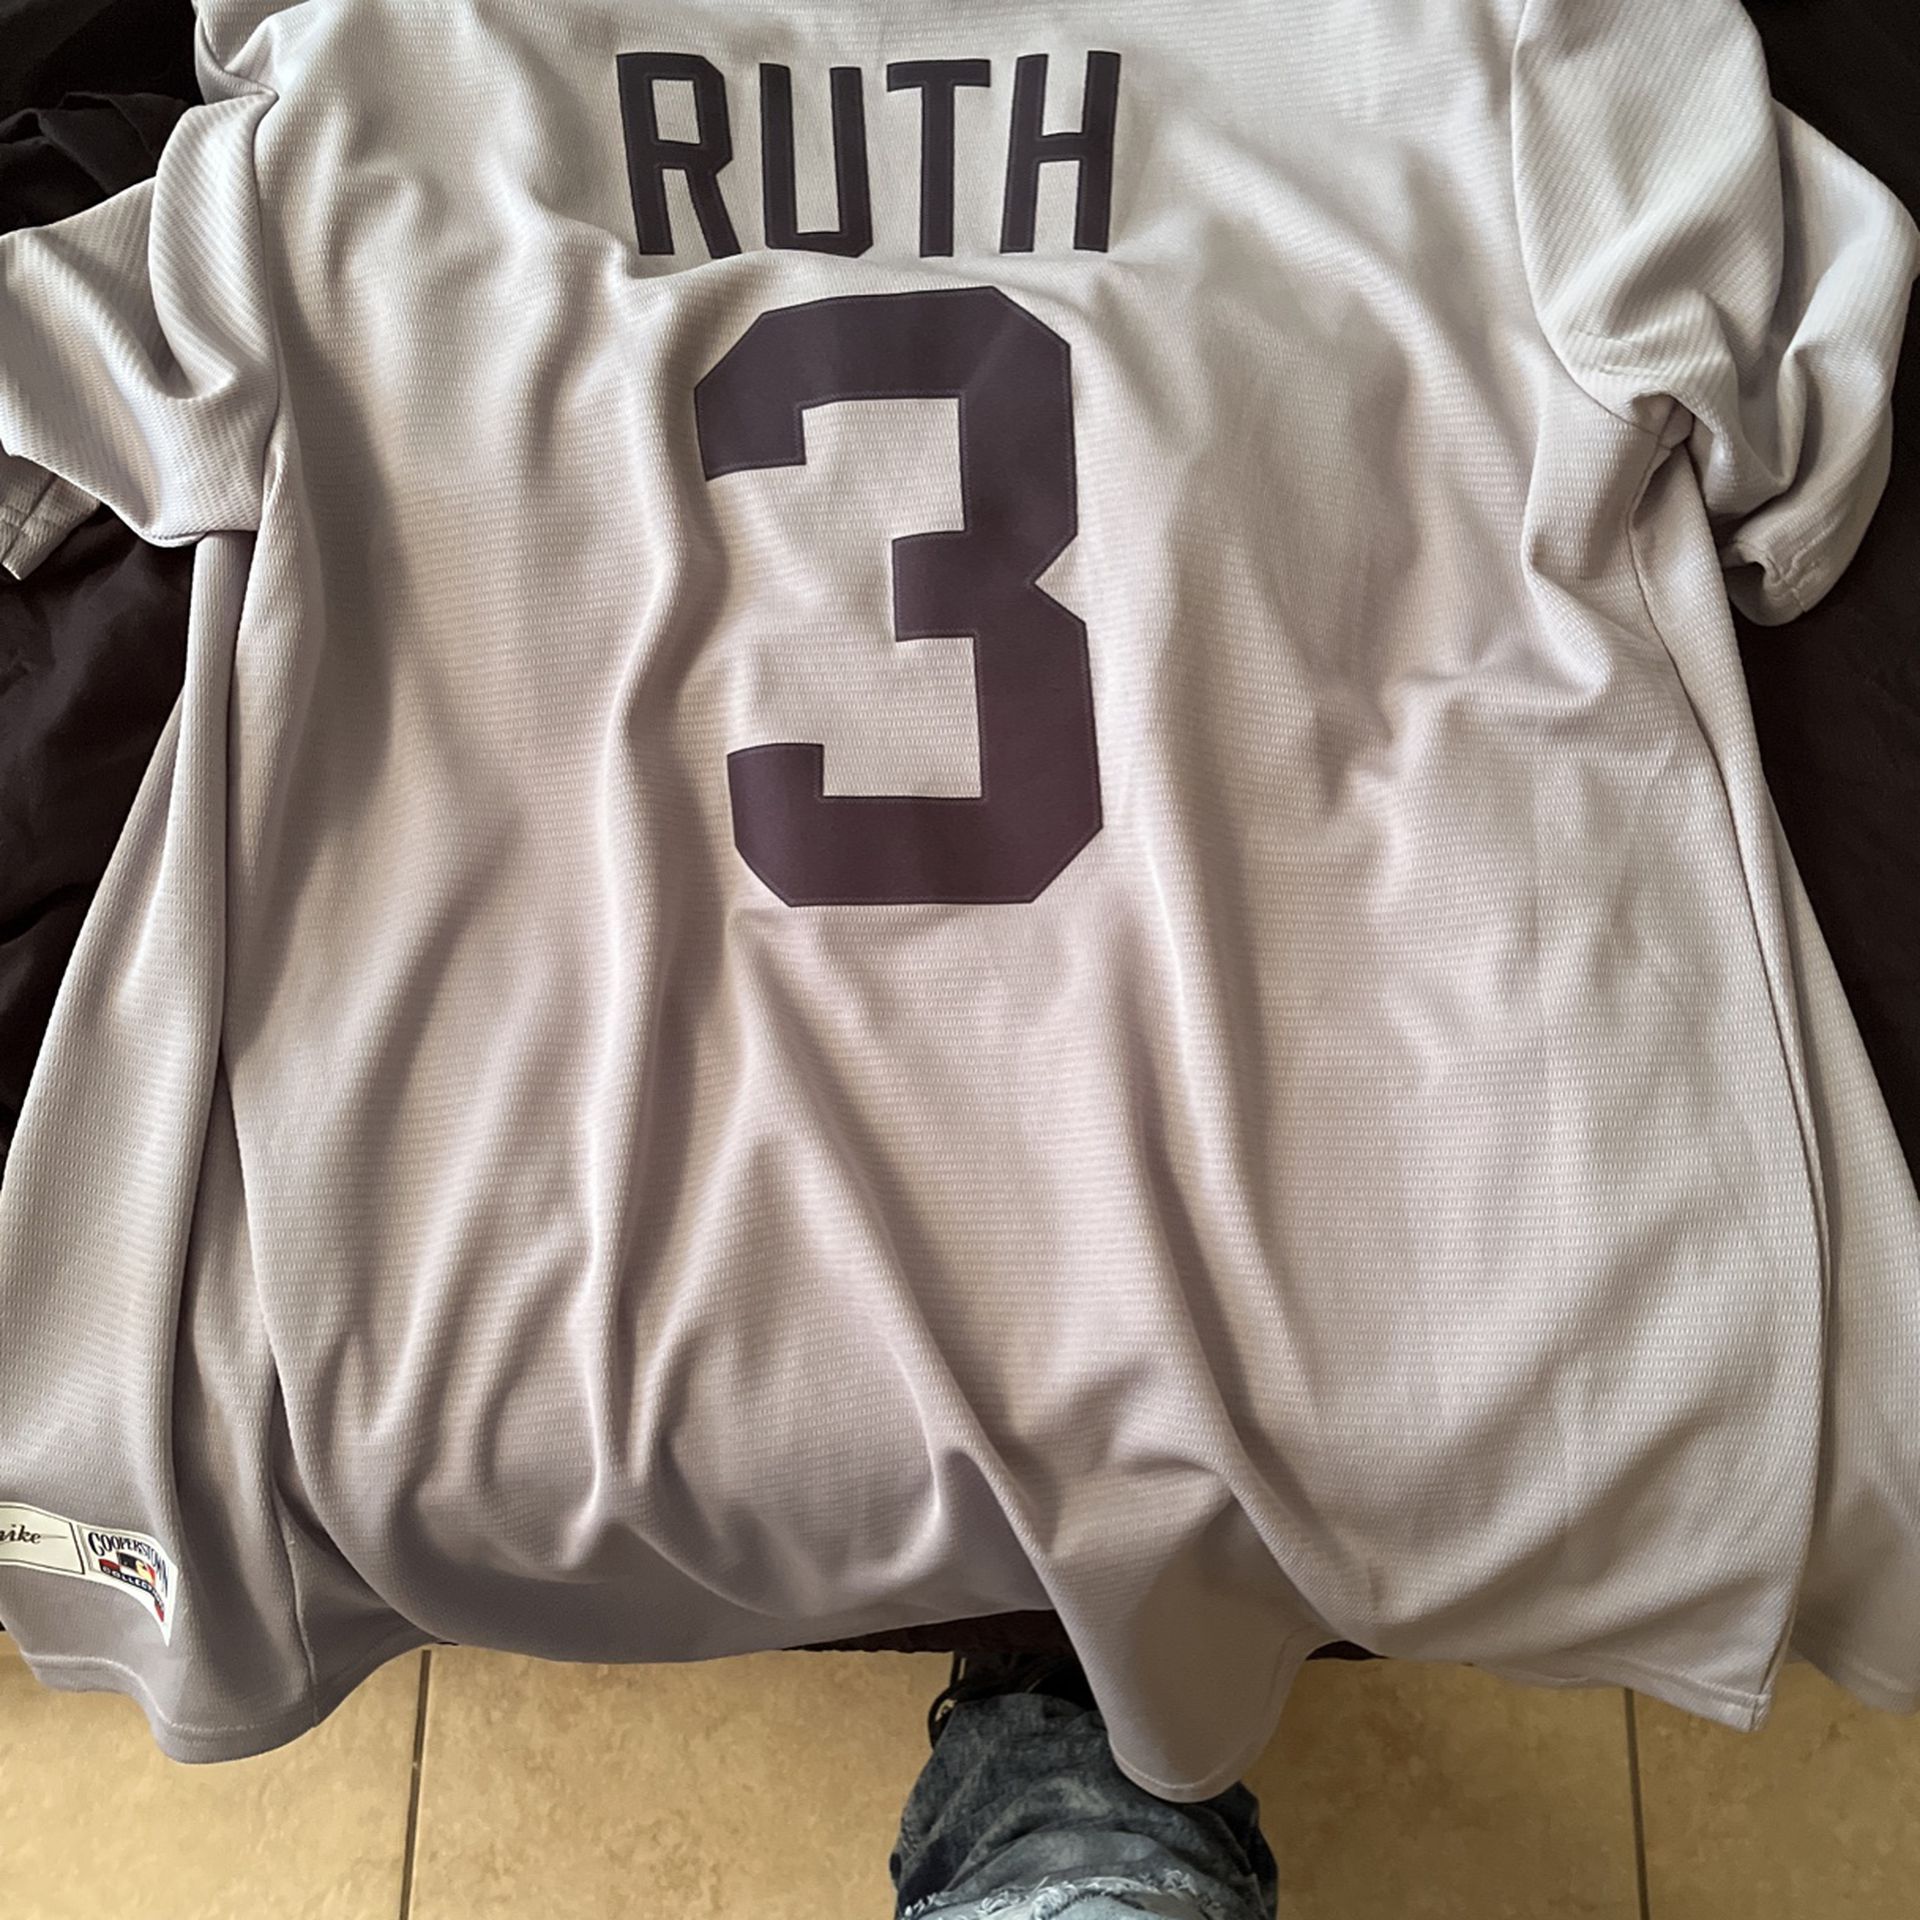 Medium Babe Ruth Jersey for Sale in Tucson, AZ - OfferUp